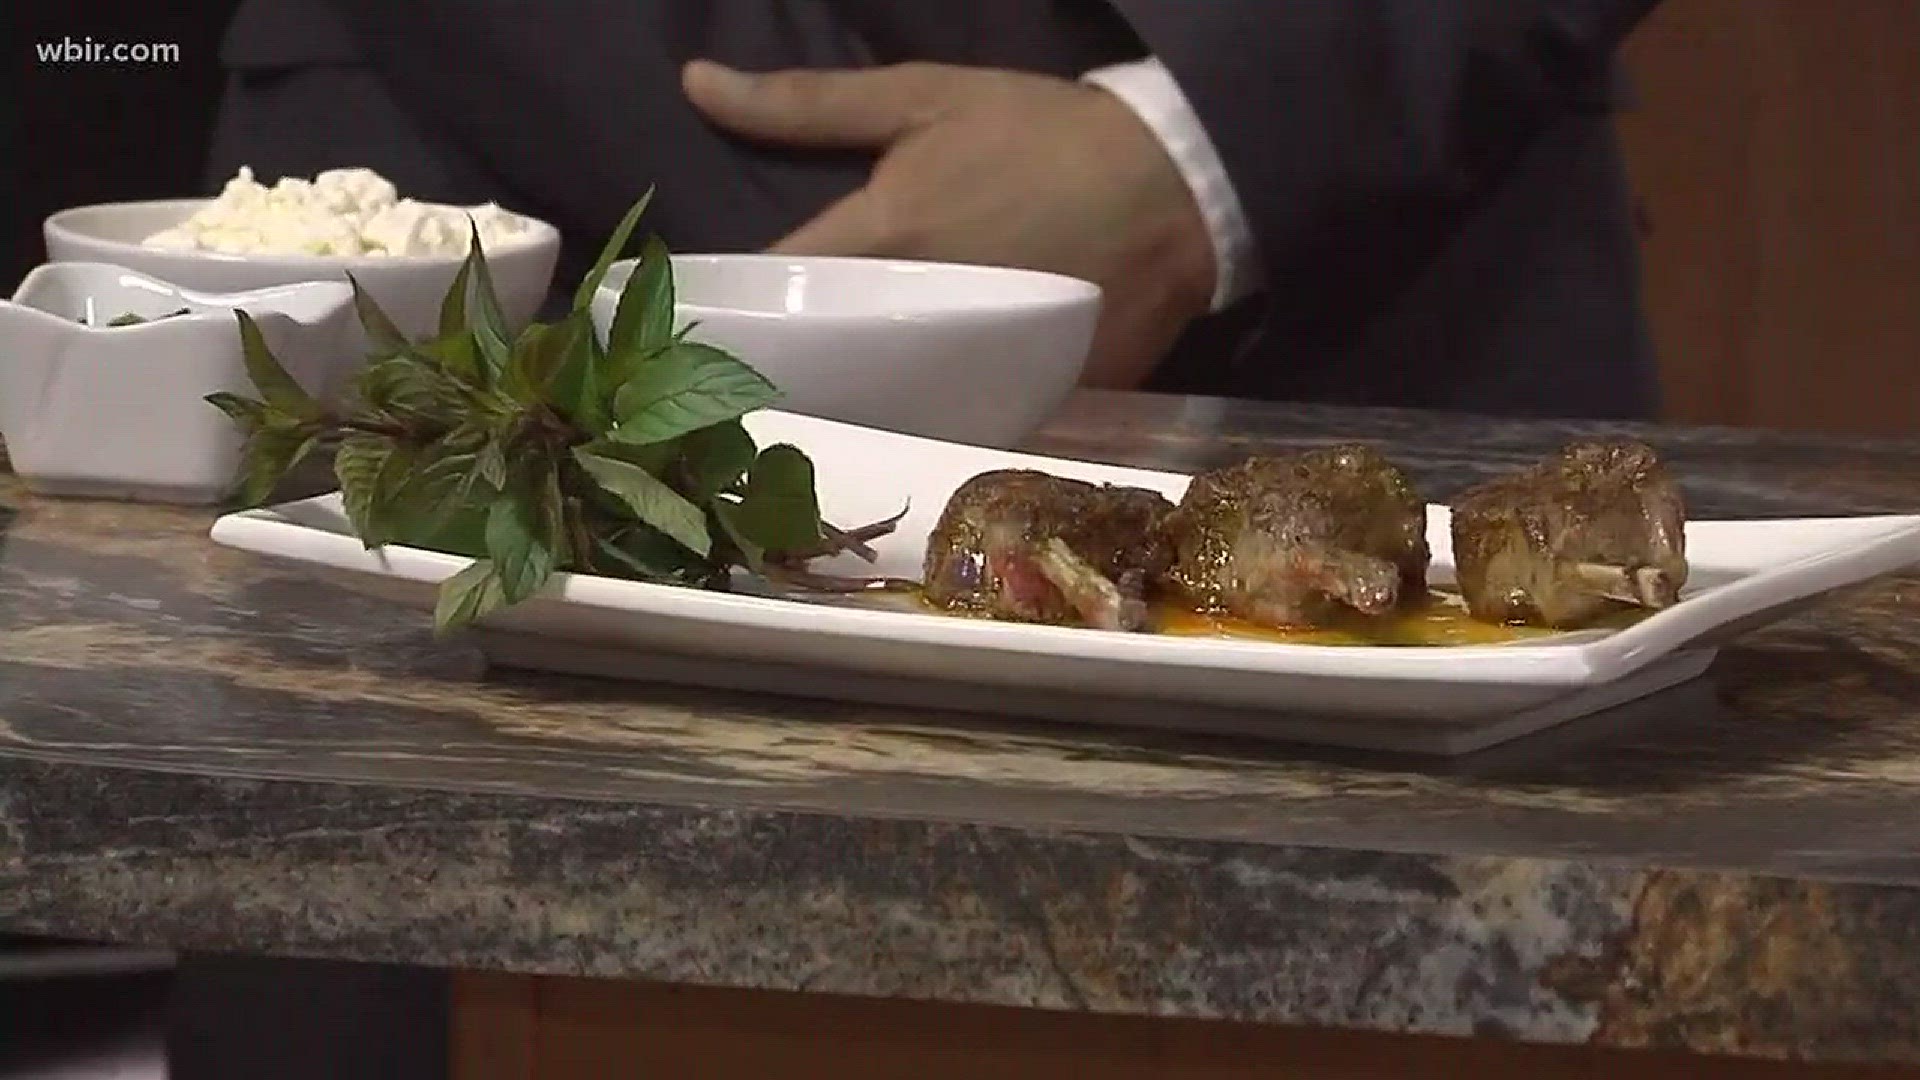 Gary Nicely from Naples Italian Restaurant shows us to how make Moroccan mint seared lamb chops.